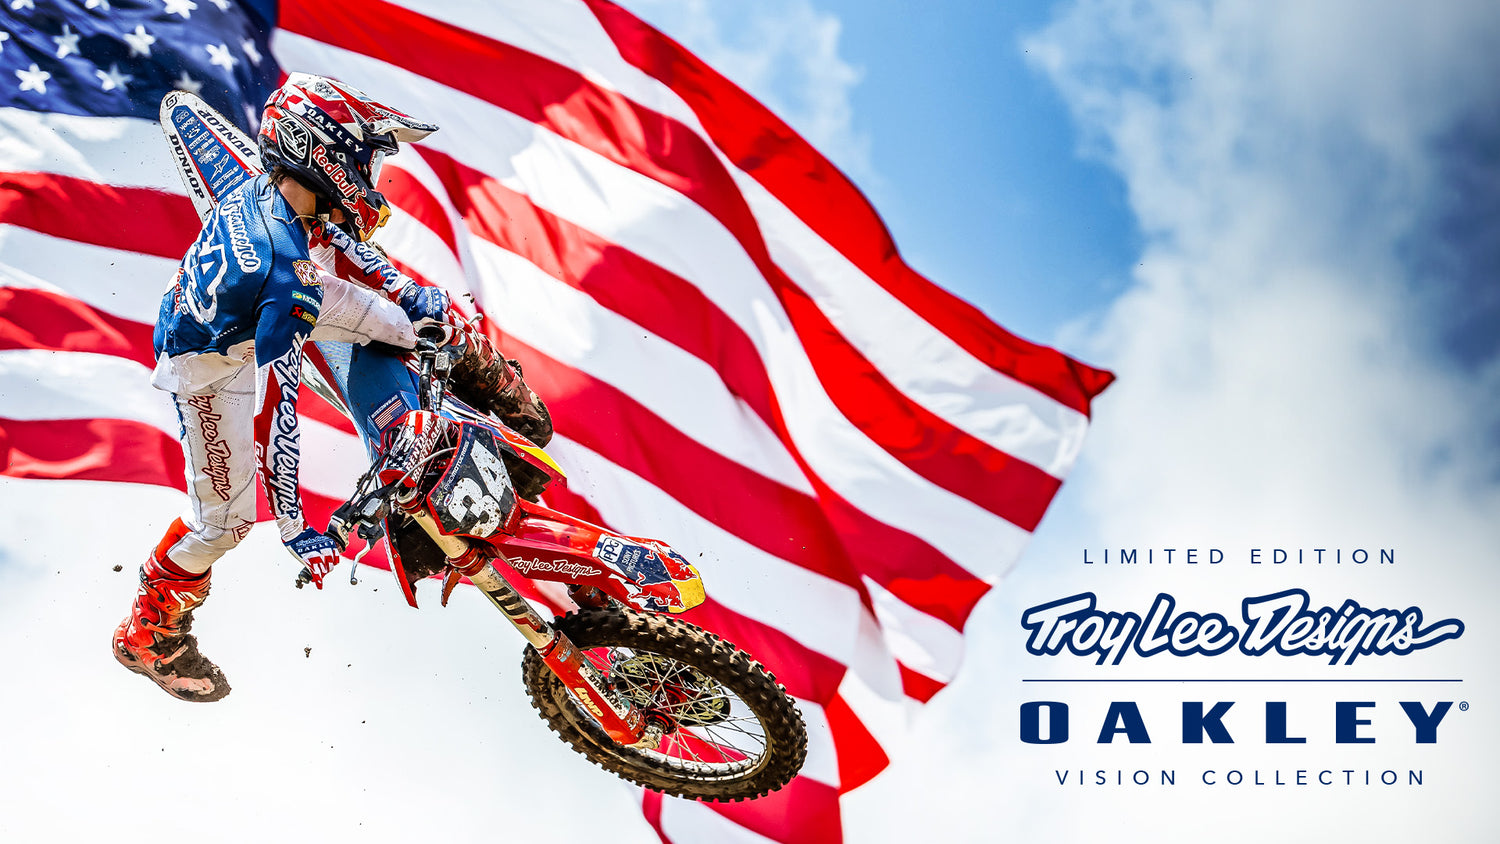 Troy Lee Designs x Oakley Limited Edition Kit